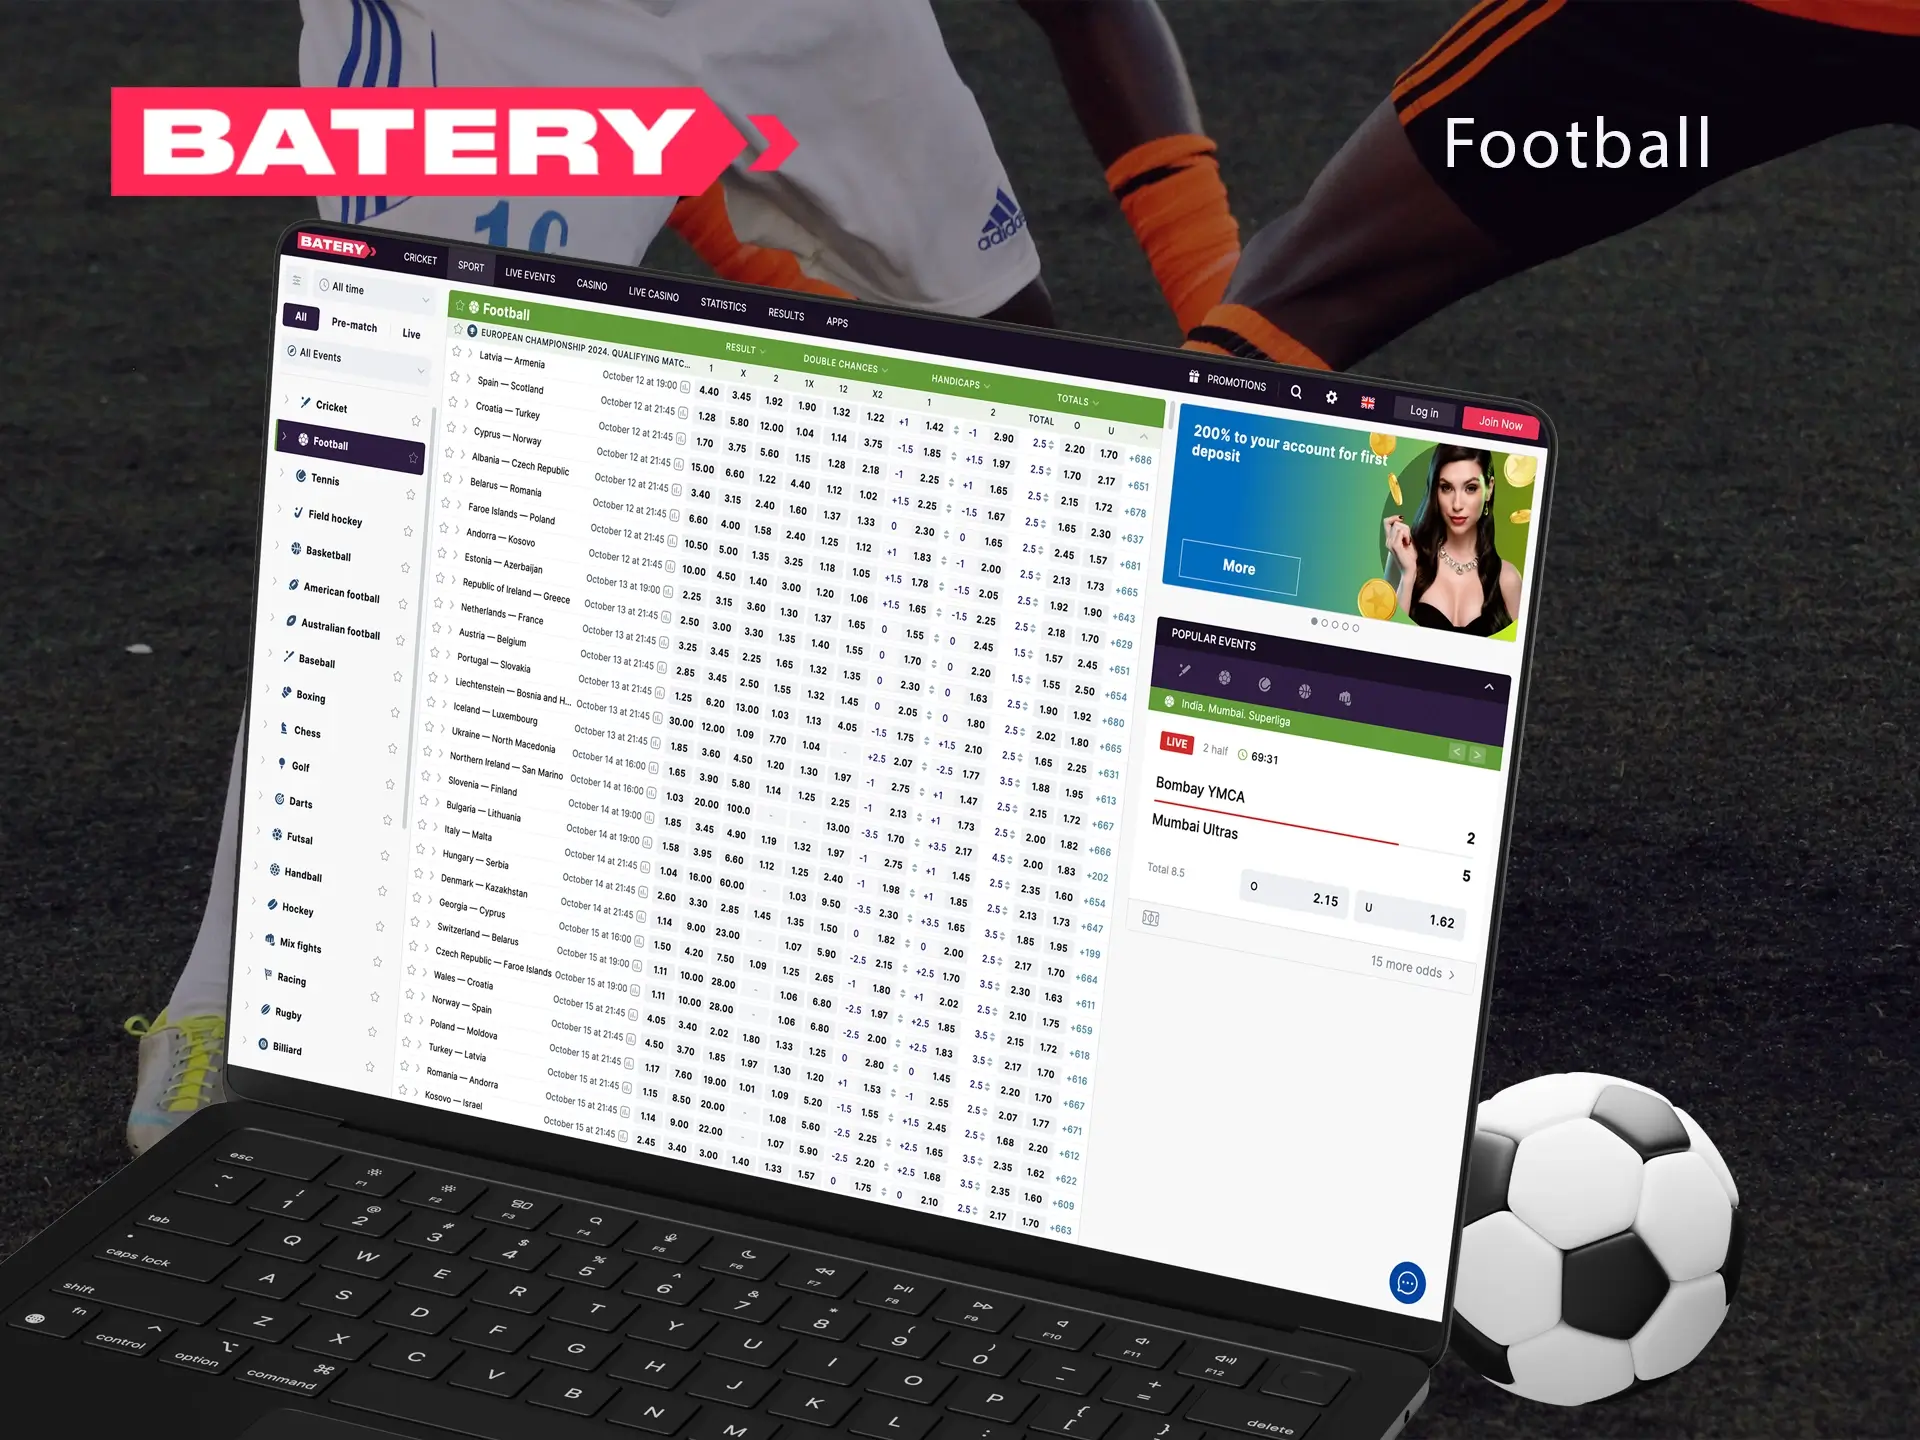 Football has a huge number of fans all over the world and Batery gives all its customers the opportunity to make this sport even more colourful.